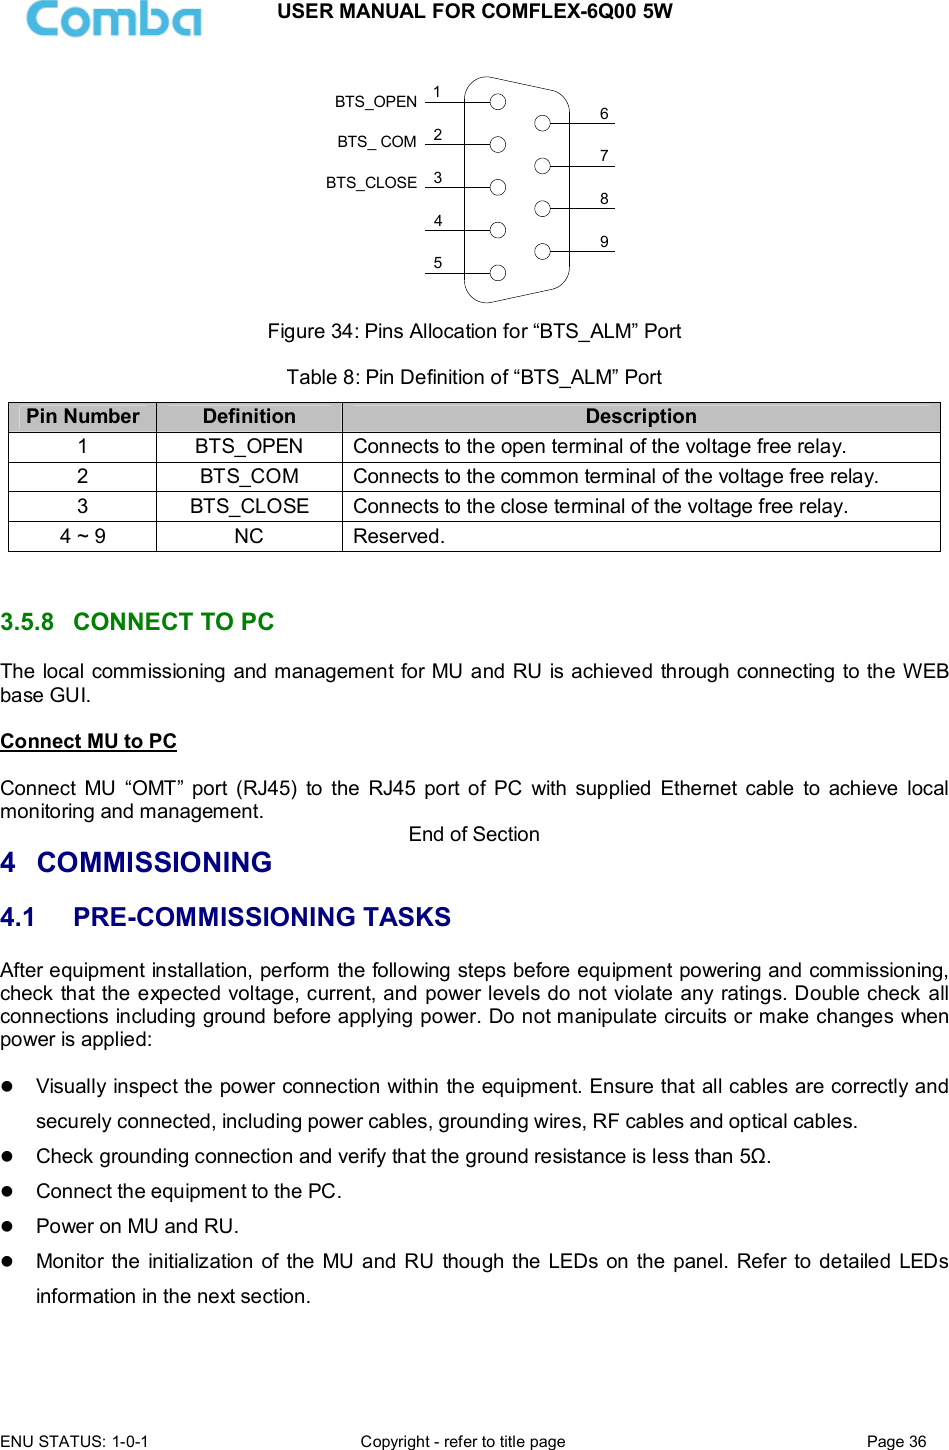 USER MANUAL FOR COMFLEX-6Q00 5W  ENU STATUS: 1-0-1  Copyright - refer to title page  Page 36      124356798BTS_OPENBTS_CLOSEBTS_ COM Figure 34: Pins Allocation for “BTS_ALM” Port  Table 8: Pin Definition of “BTS_ALM” Port Pin Number Definition  Description 1  BTS_OPEN  Connects to the open terminal of the voltage free relay. 2  BTS_COM   Connects to the common terminal of the voltage free relay. 3  BTS_CLOSE  Connects to the close terminal of the voltage free relay. 4 ~ 9  NC  Reserved.   3.5.8  CONNECT TO PC The local commissioning and management for MU and RU is achieved through connecting to the WEB base GUI.  Connect MU to PC  Connect  MU  “OMT” port  (RJ45)  to  the  RJ45  port  of  PC  with  supplied  Ethernet  cable  to  achieve  local monitoring and management.  End of Section 4  COMMISSIONING 4.1  PRE-COMMISSIONING TASKS After equipment installation, perform the following steps before equipment powering and commissioning, check that the expected voltage, current, and power levels do not violate any ratings. Double check all connections including ground before applying power. Do not manipulate circuits or make changes when power is applied:   Visually inspect the power connection within the equipment. Ensure that all cables are correctly and securely connected, including power cables, grounding wires, RF cables and optical cables.   Check grounding connection and verify that the ground resistance is less than 5Ω.  Connect the equipment to the PC.   Power on MU and RU.  Monitor the  initialization  of the MU and RU  though the LEDs on the panel. Refer to detailed  LEDs information in the next section.   